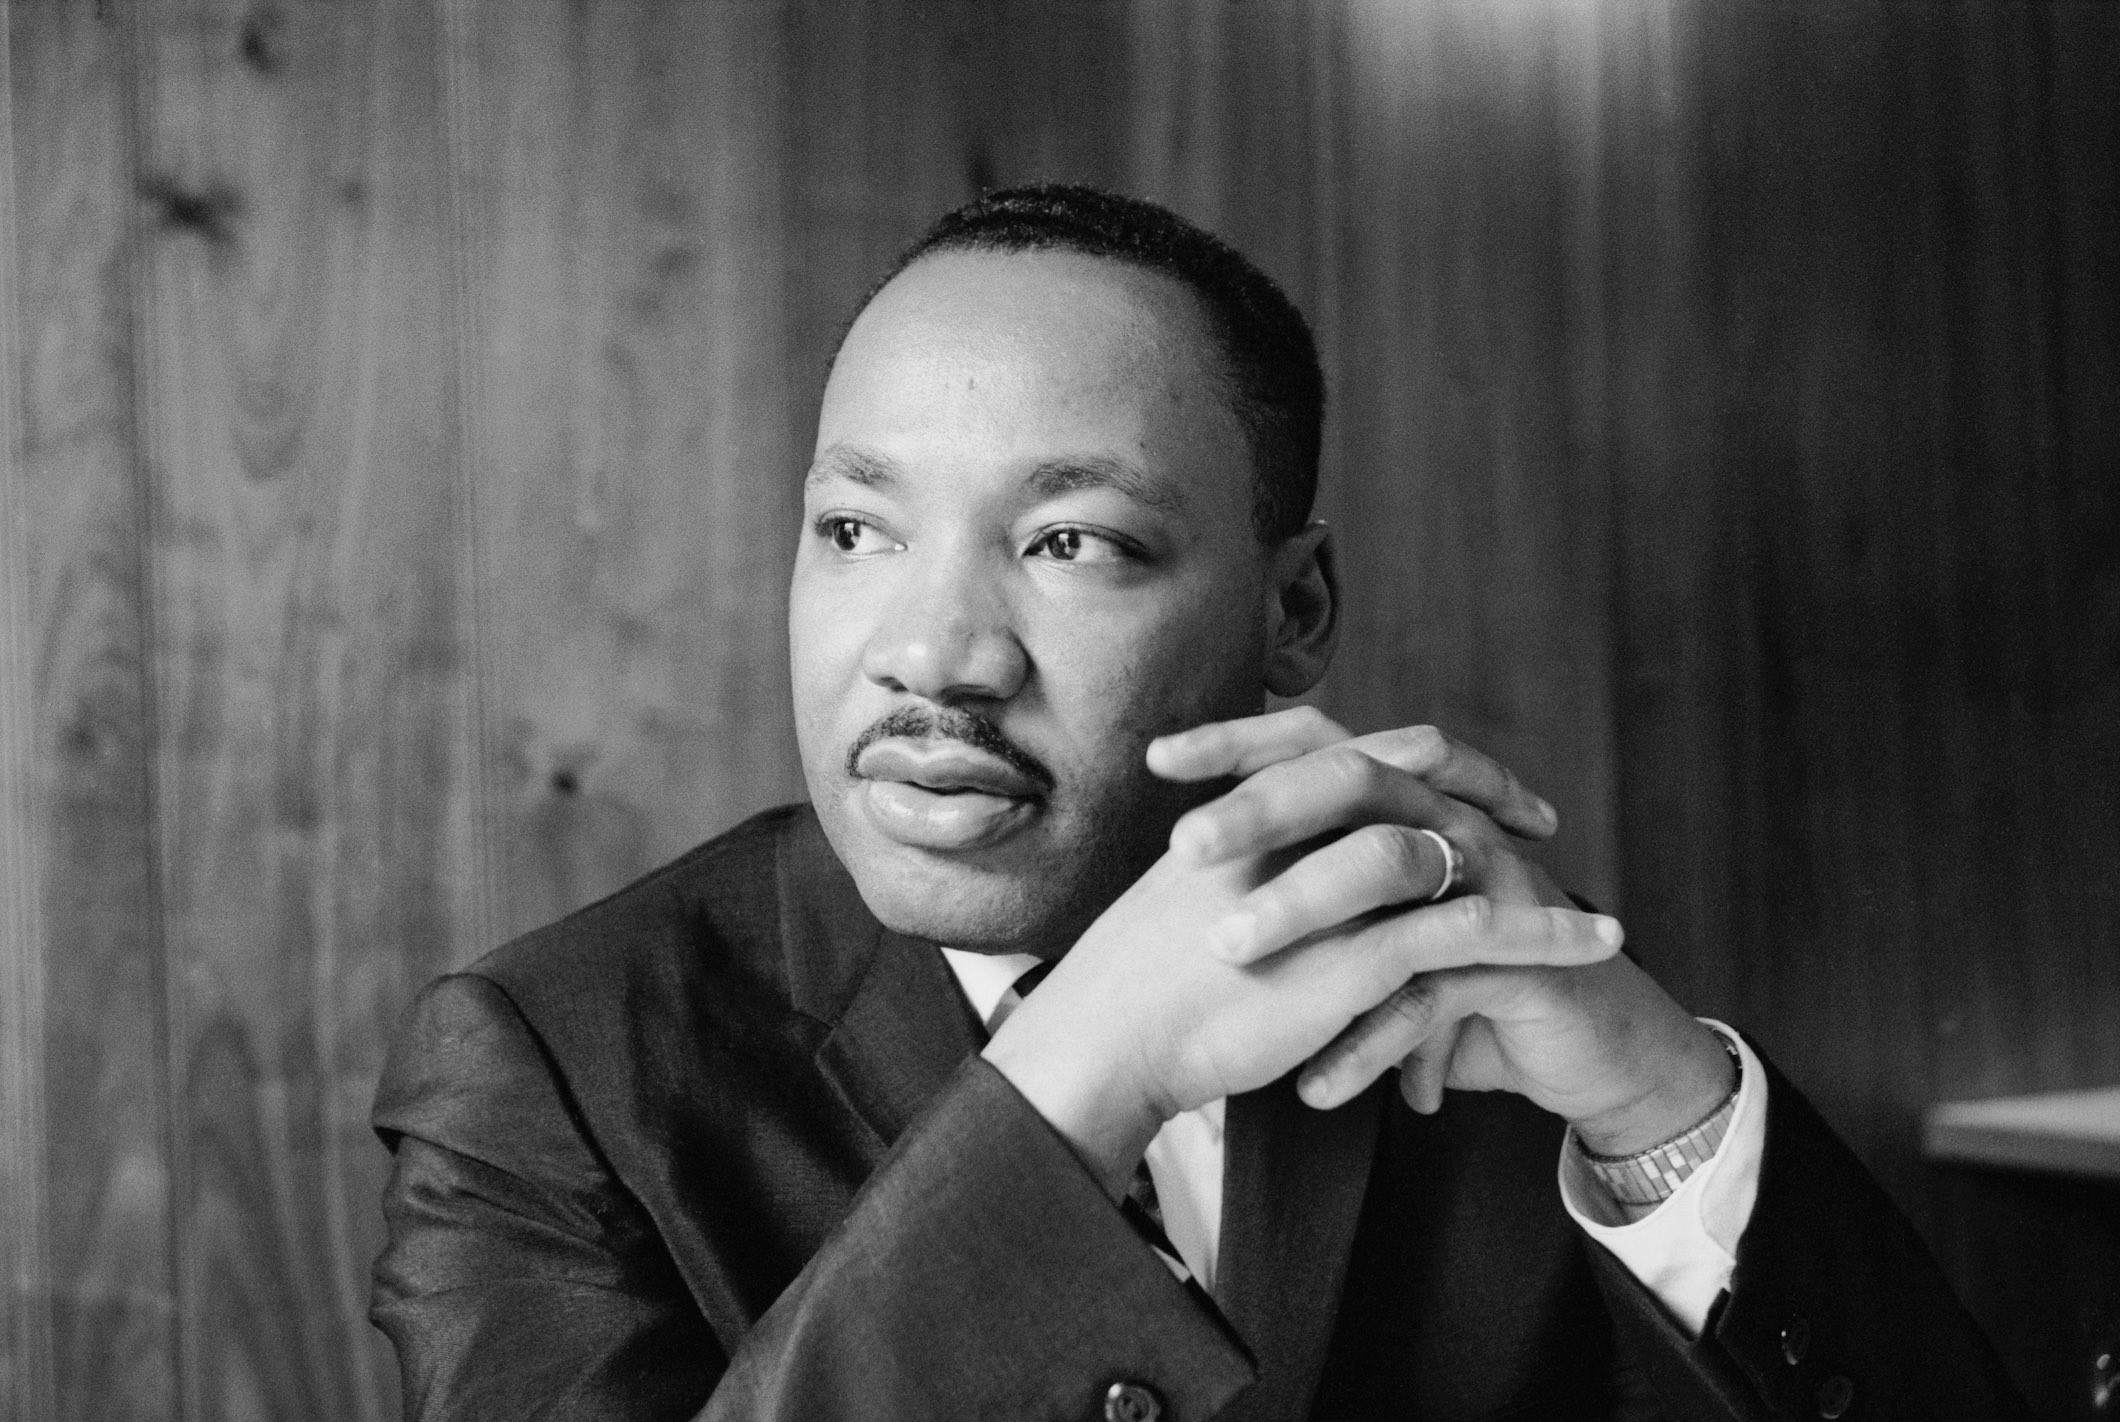 Beaufort County Offices Closed in Observance of Dr. Martin Luther King, Jr. Day